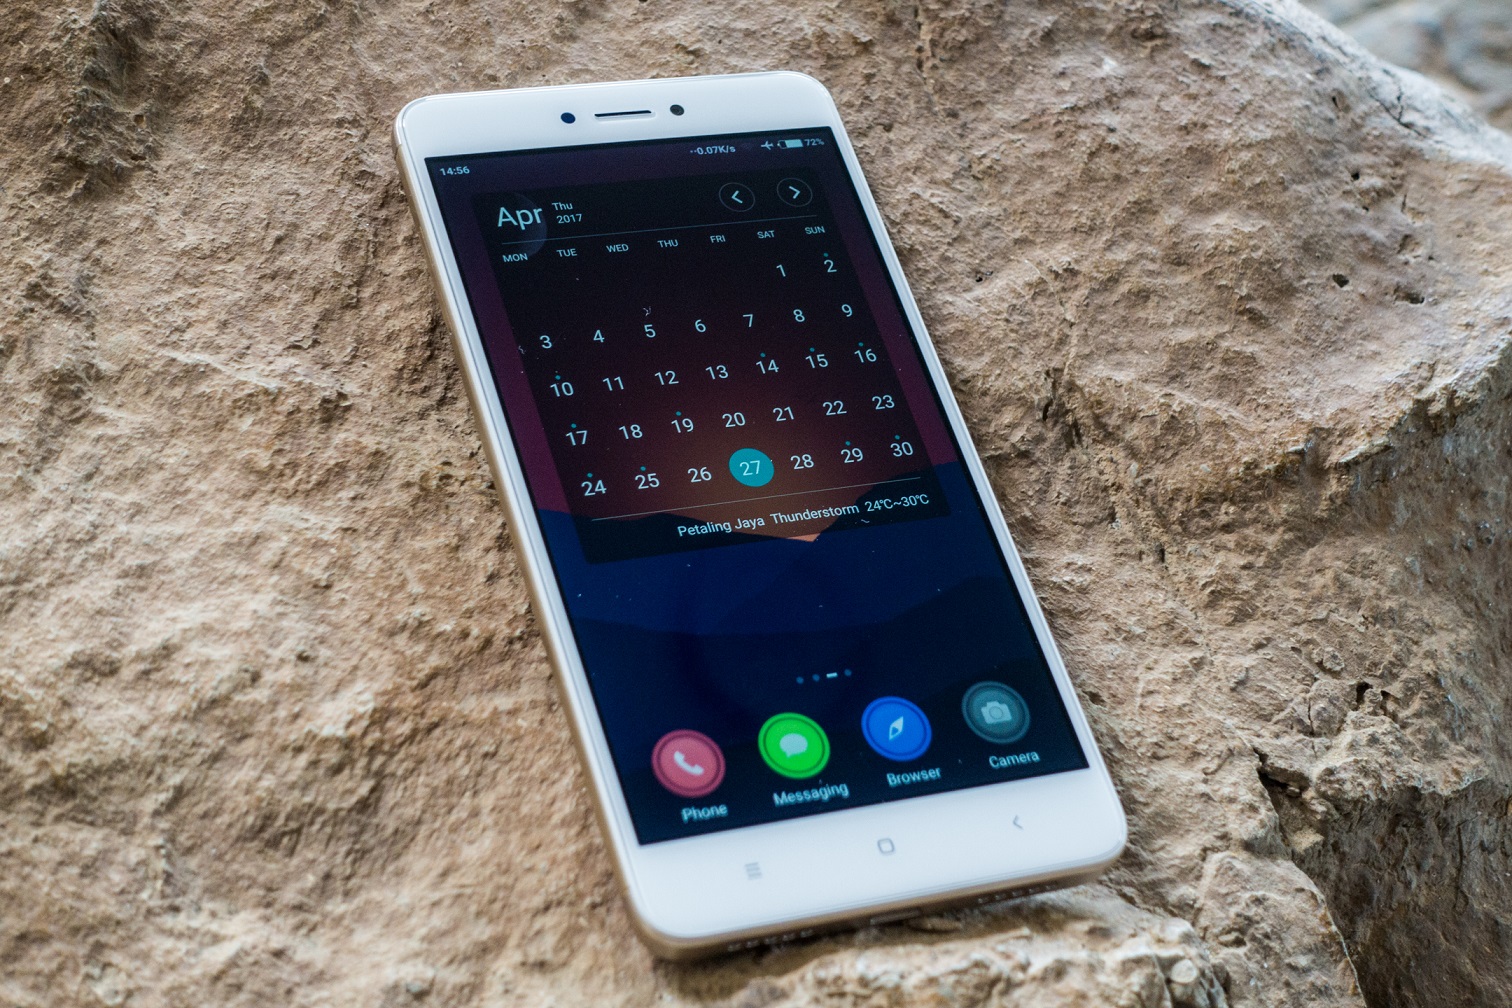 Xiaomi hits all the right notes with Redmi Note 4